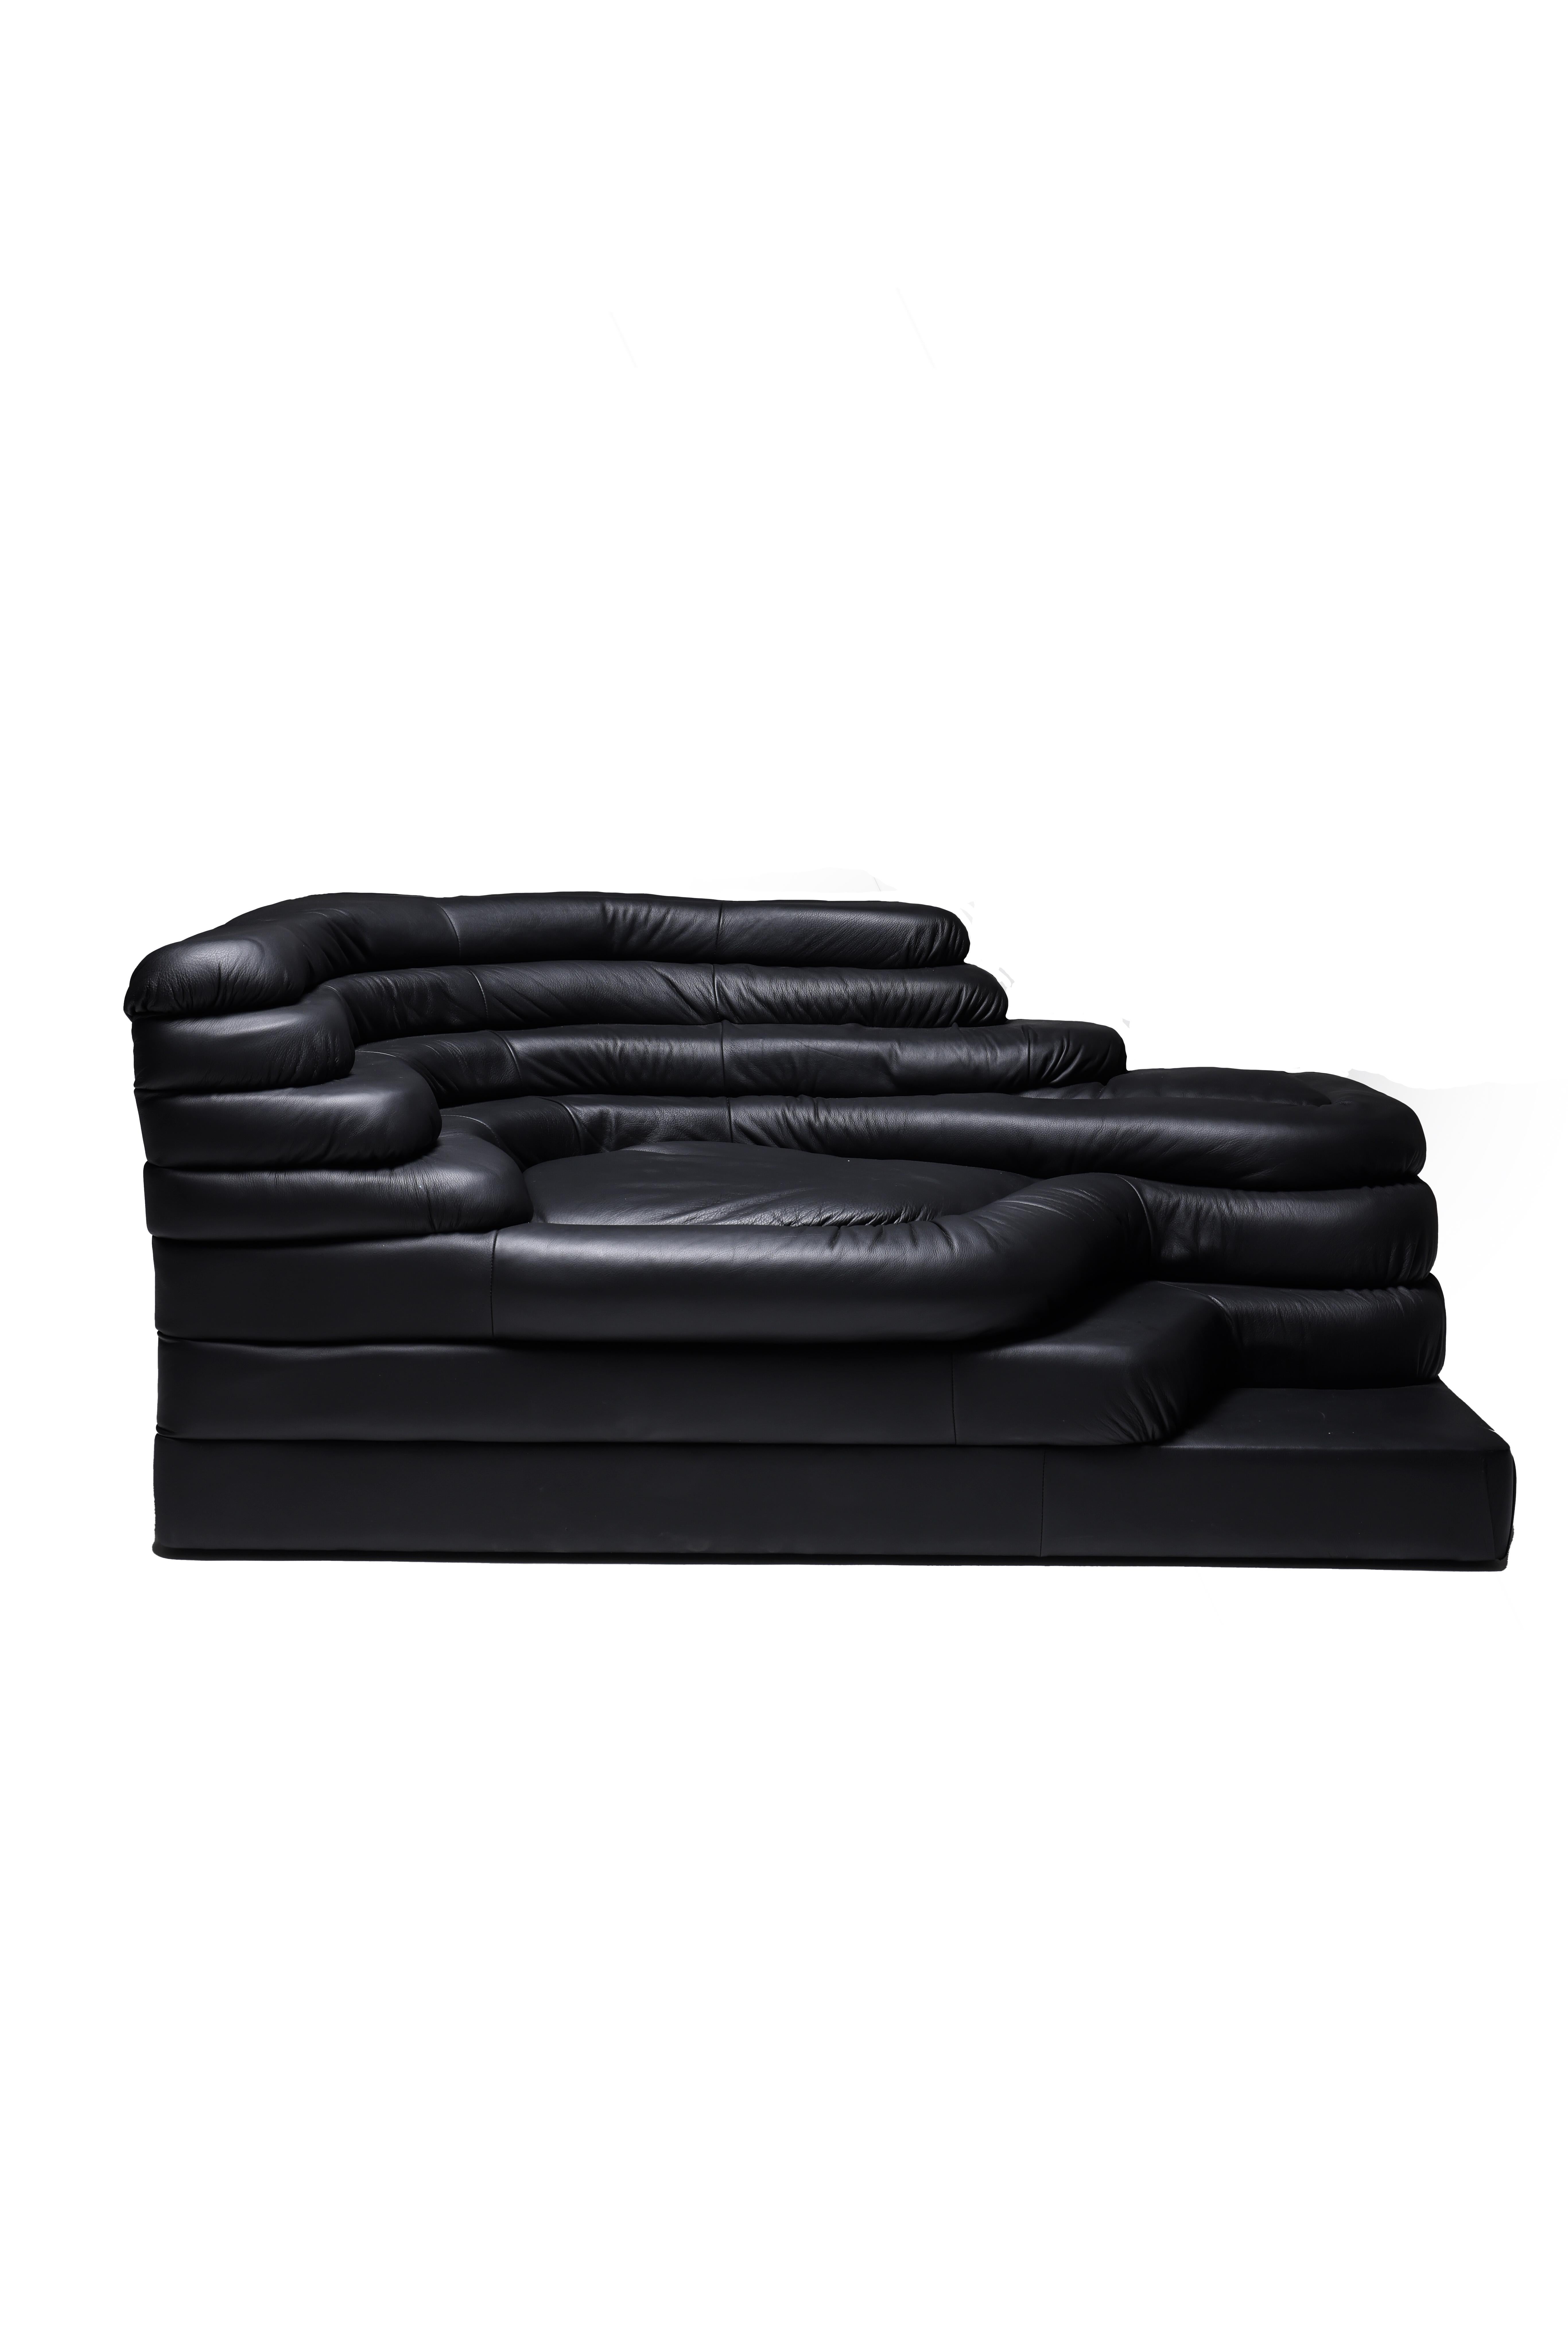 Modular sofa Terrazza 'DS-1025' in black padded leather by designer Ubald Klug (born in 1932) for the Swiss firm De Sede, 1970s. The design of this sofa was inspired by waves, waterfalls, and rock formations, clearly visible in the sofa's overlay.